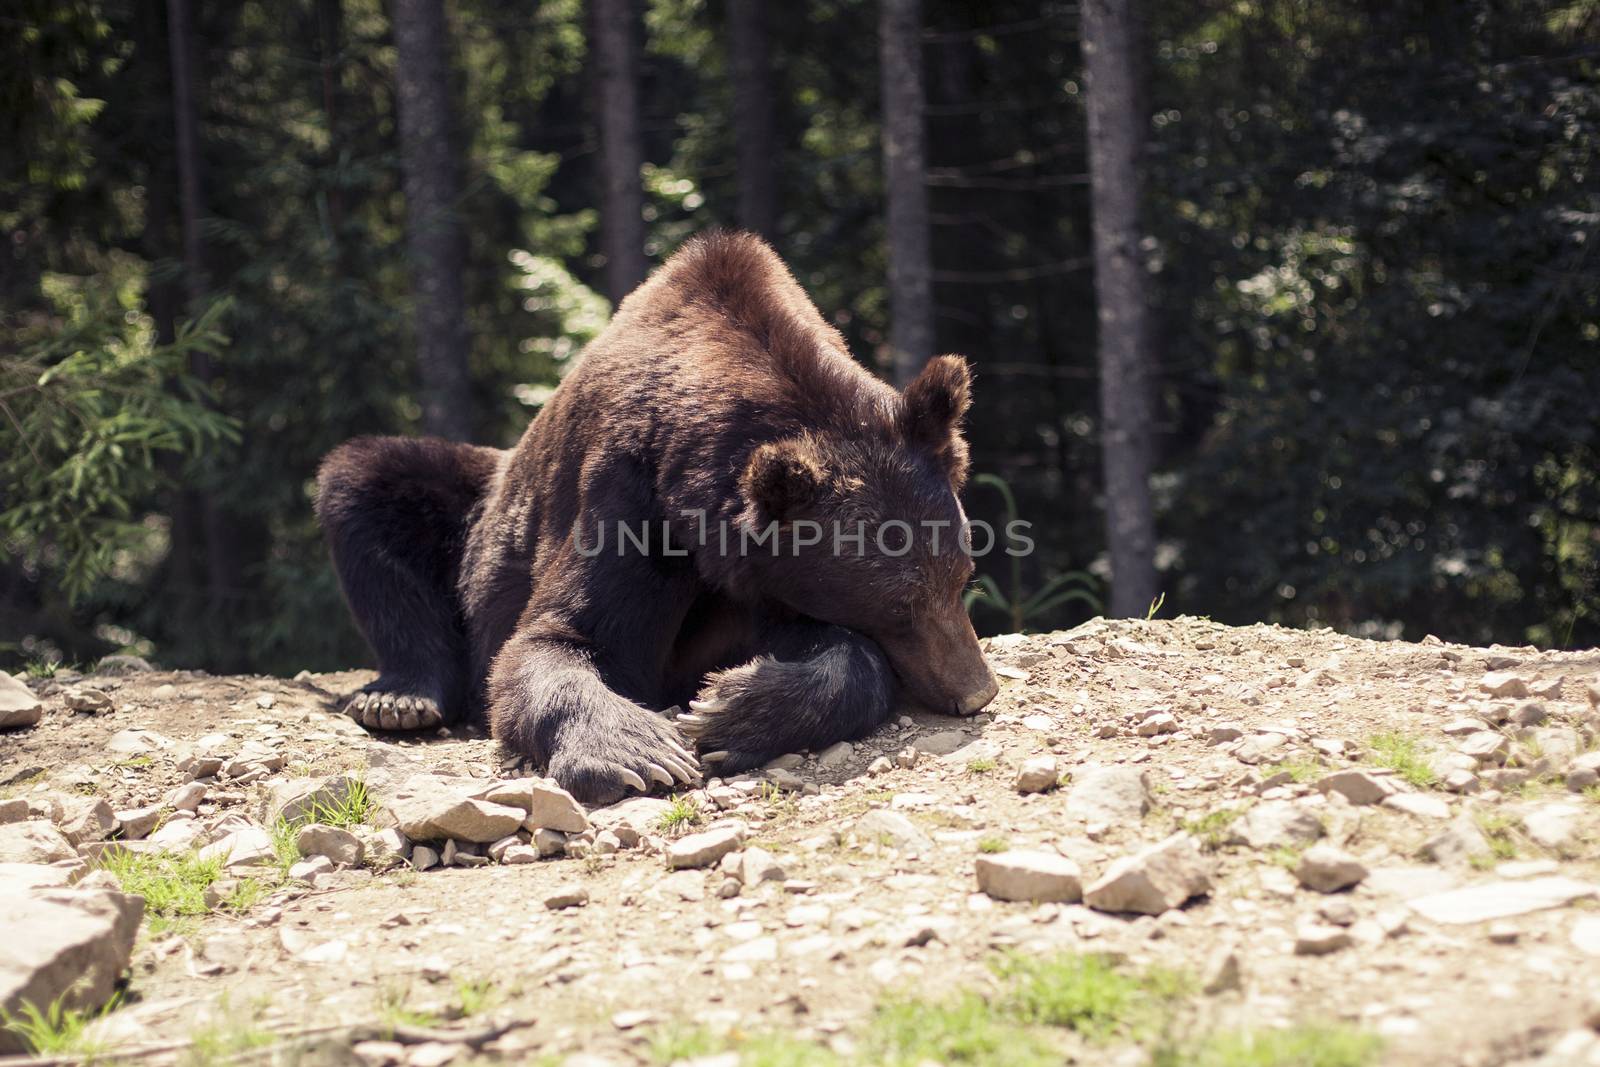 Big Brown Bear in the forest. Predatory brown grizzly bear in the wild world